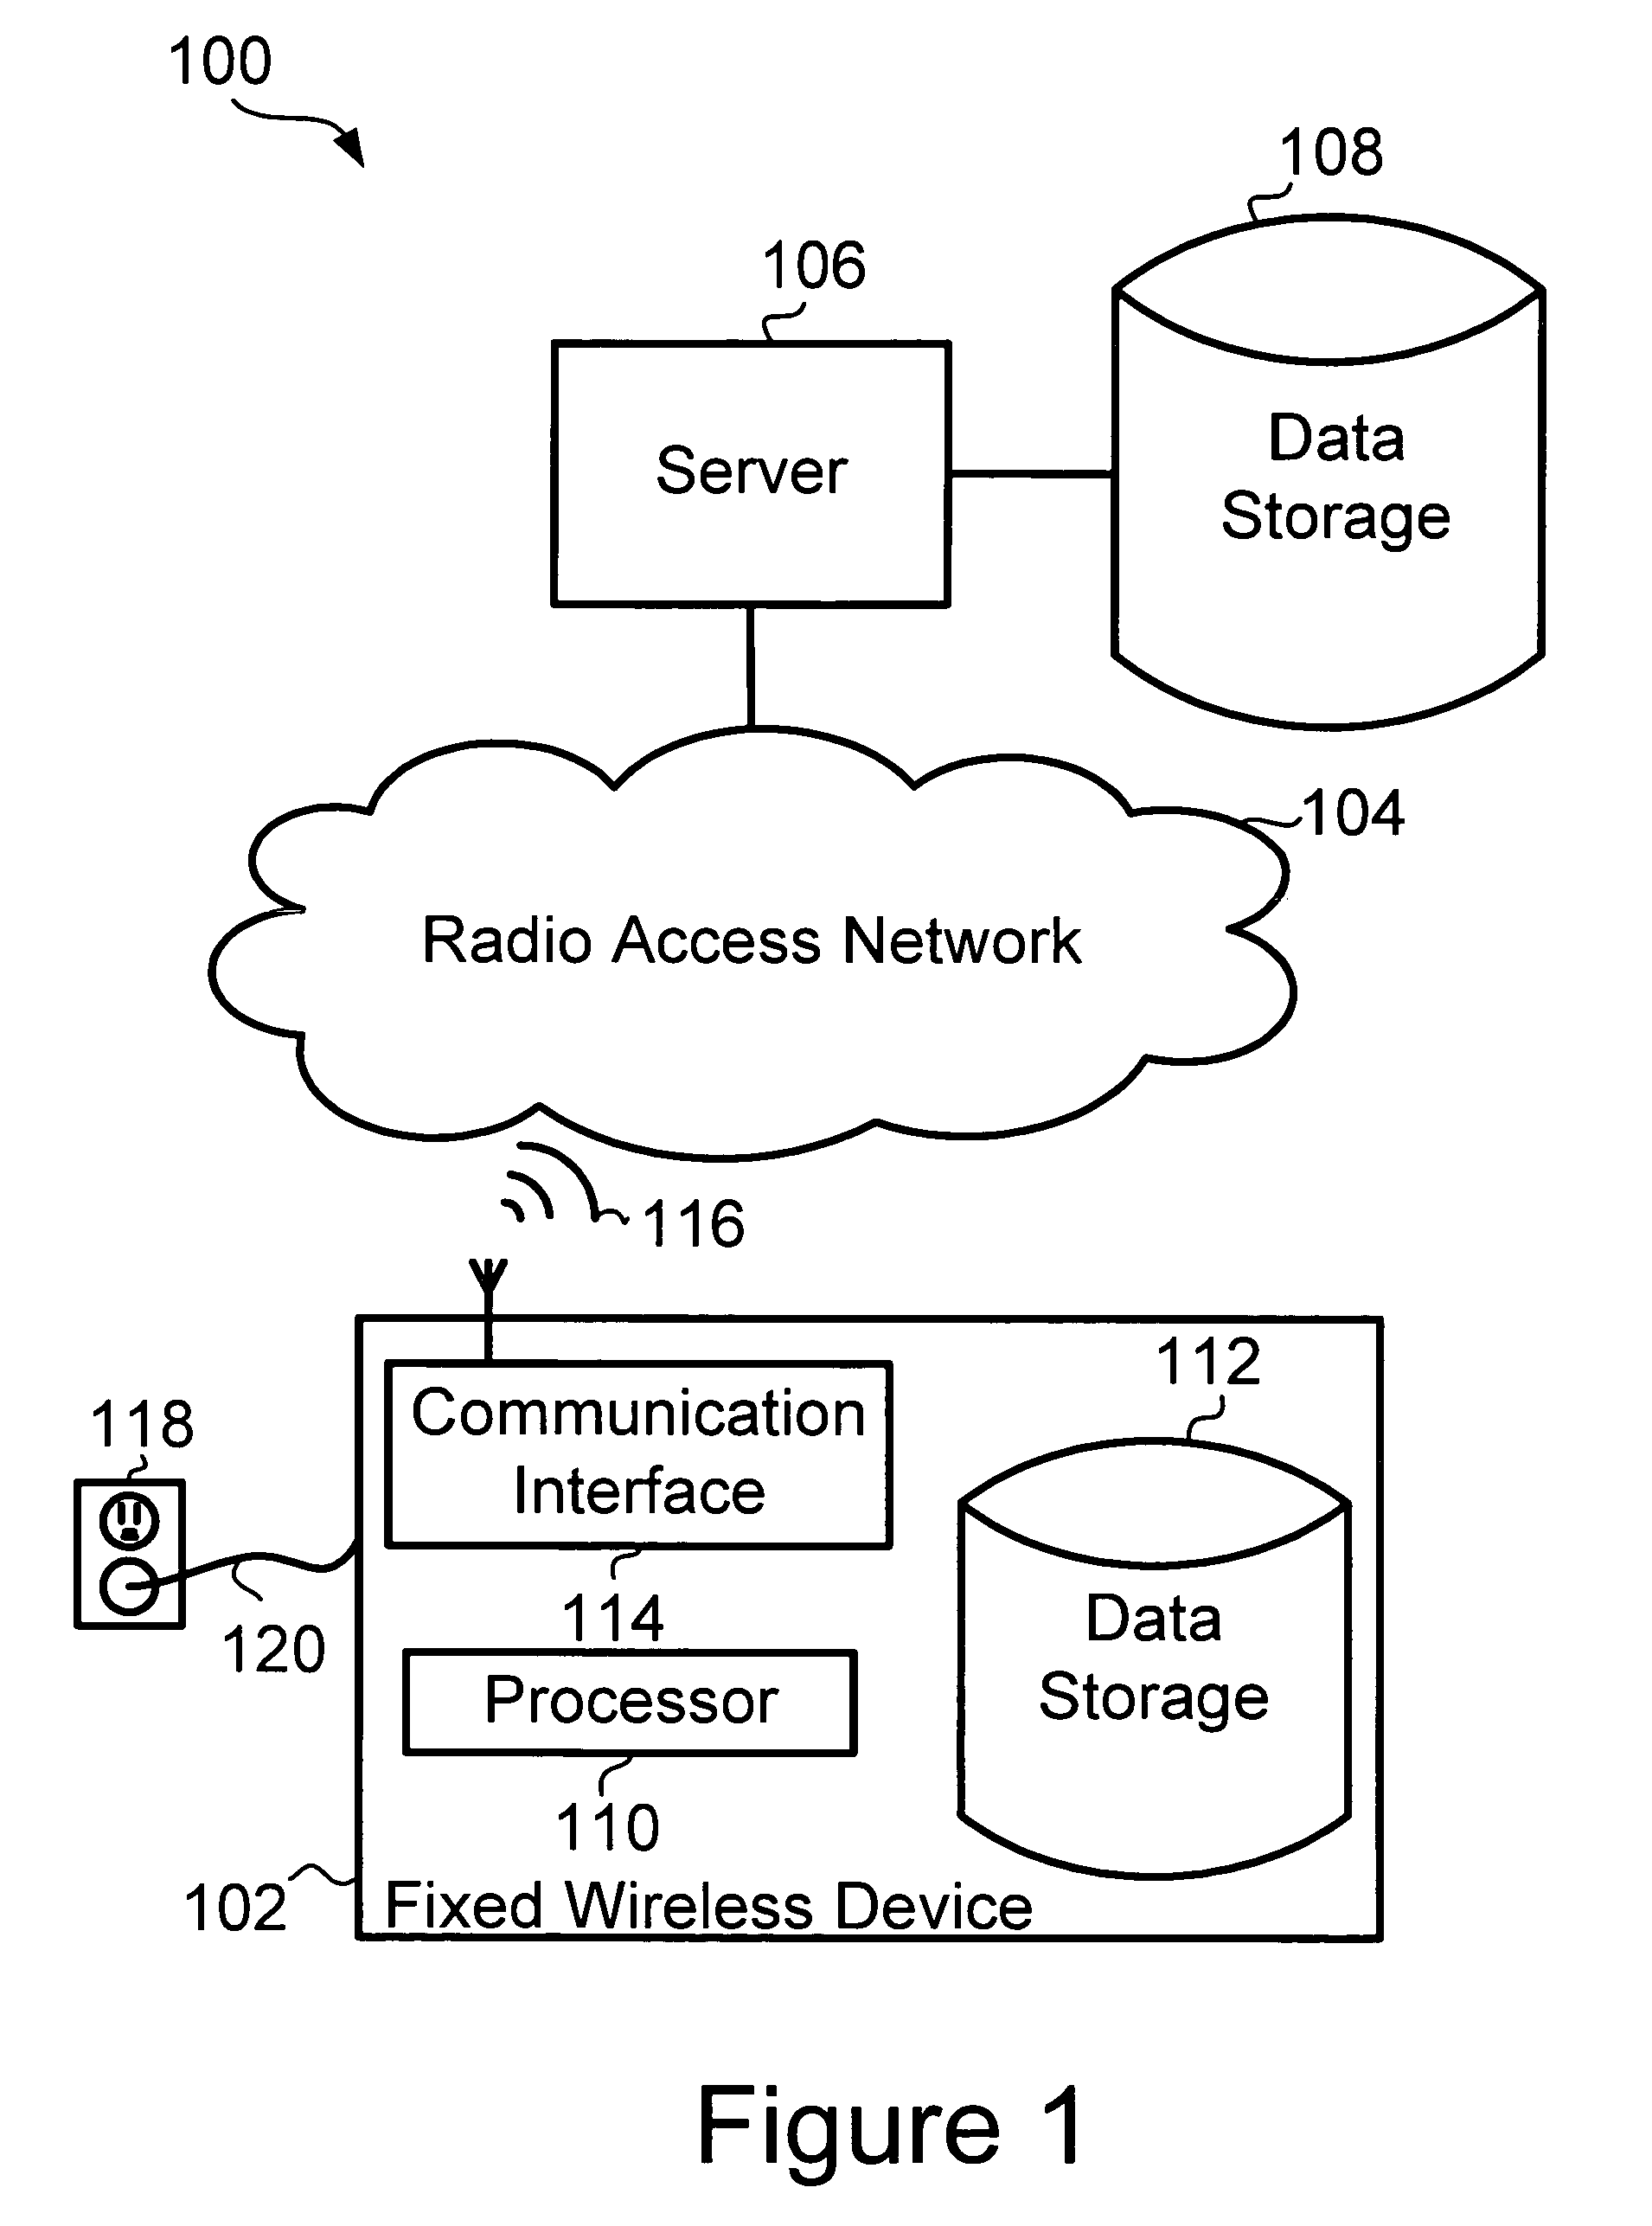 Method and system for initiating a communication with a network entity to communicate information regarding a fixed wireless device